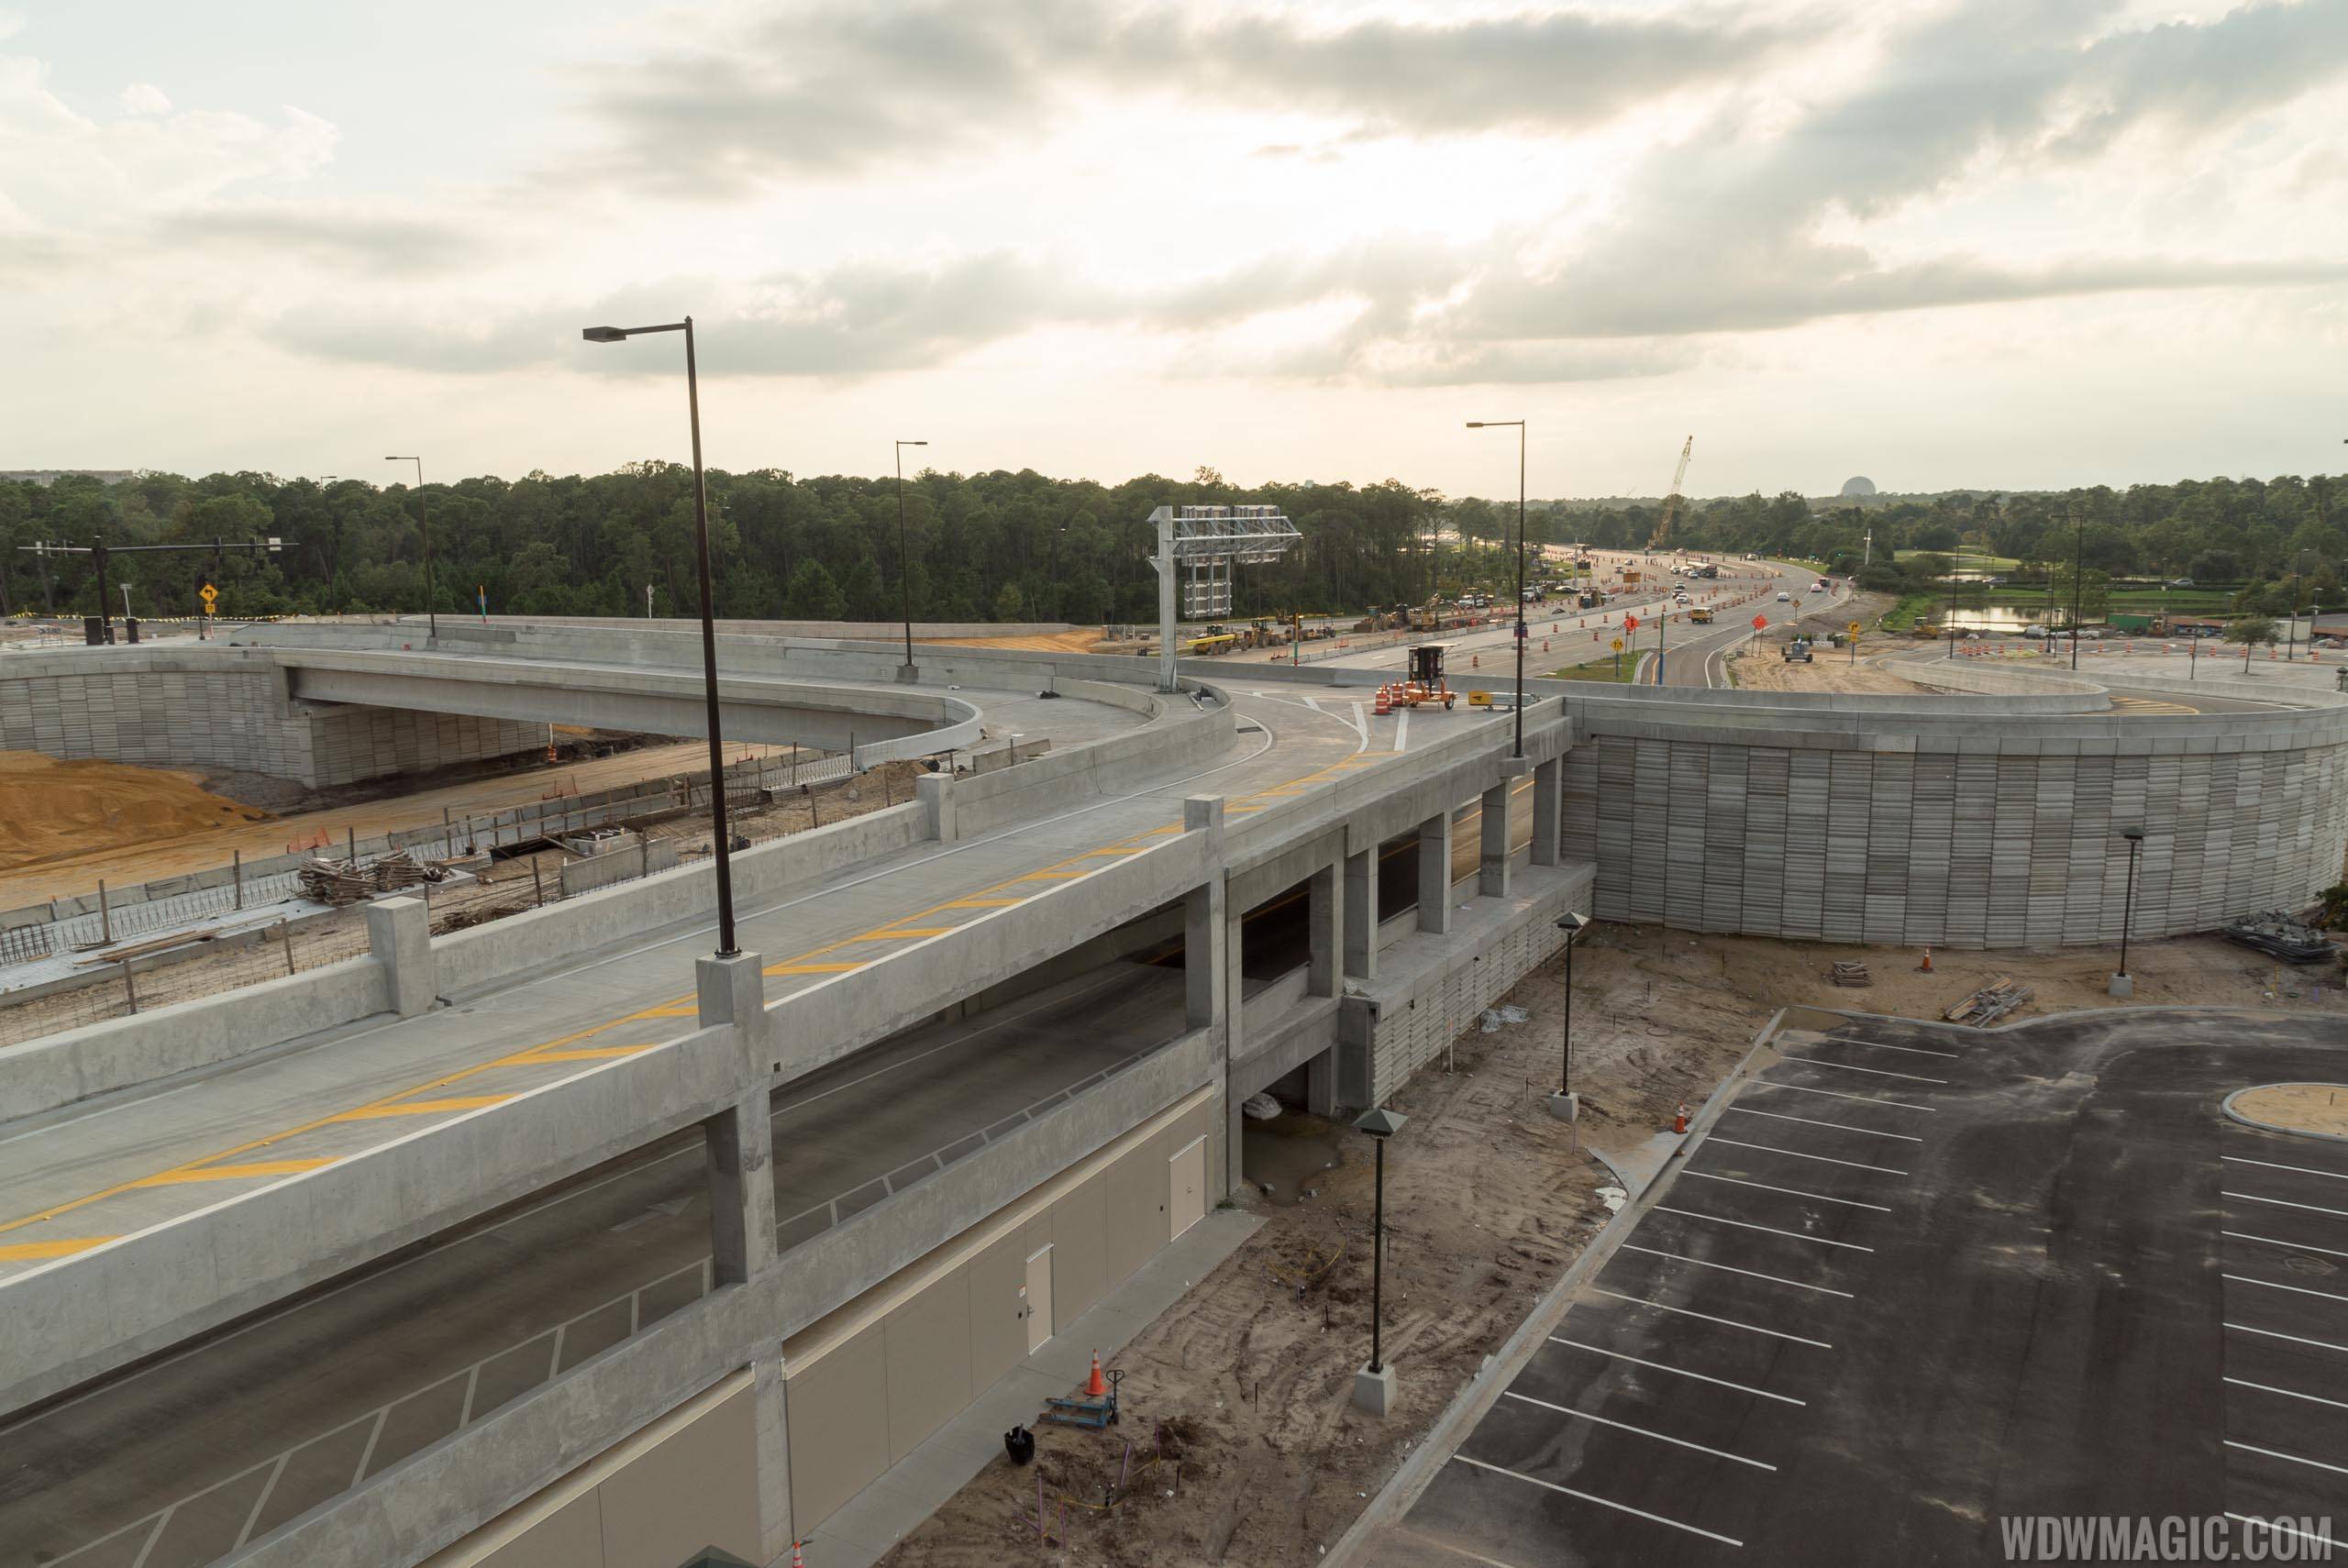 Looking along Buena Vista Drive at the Flyover ramp into the Orange Parking Garage